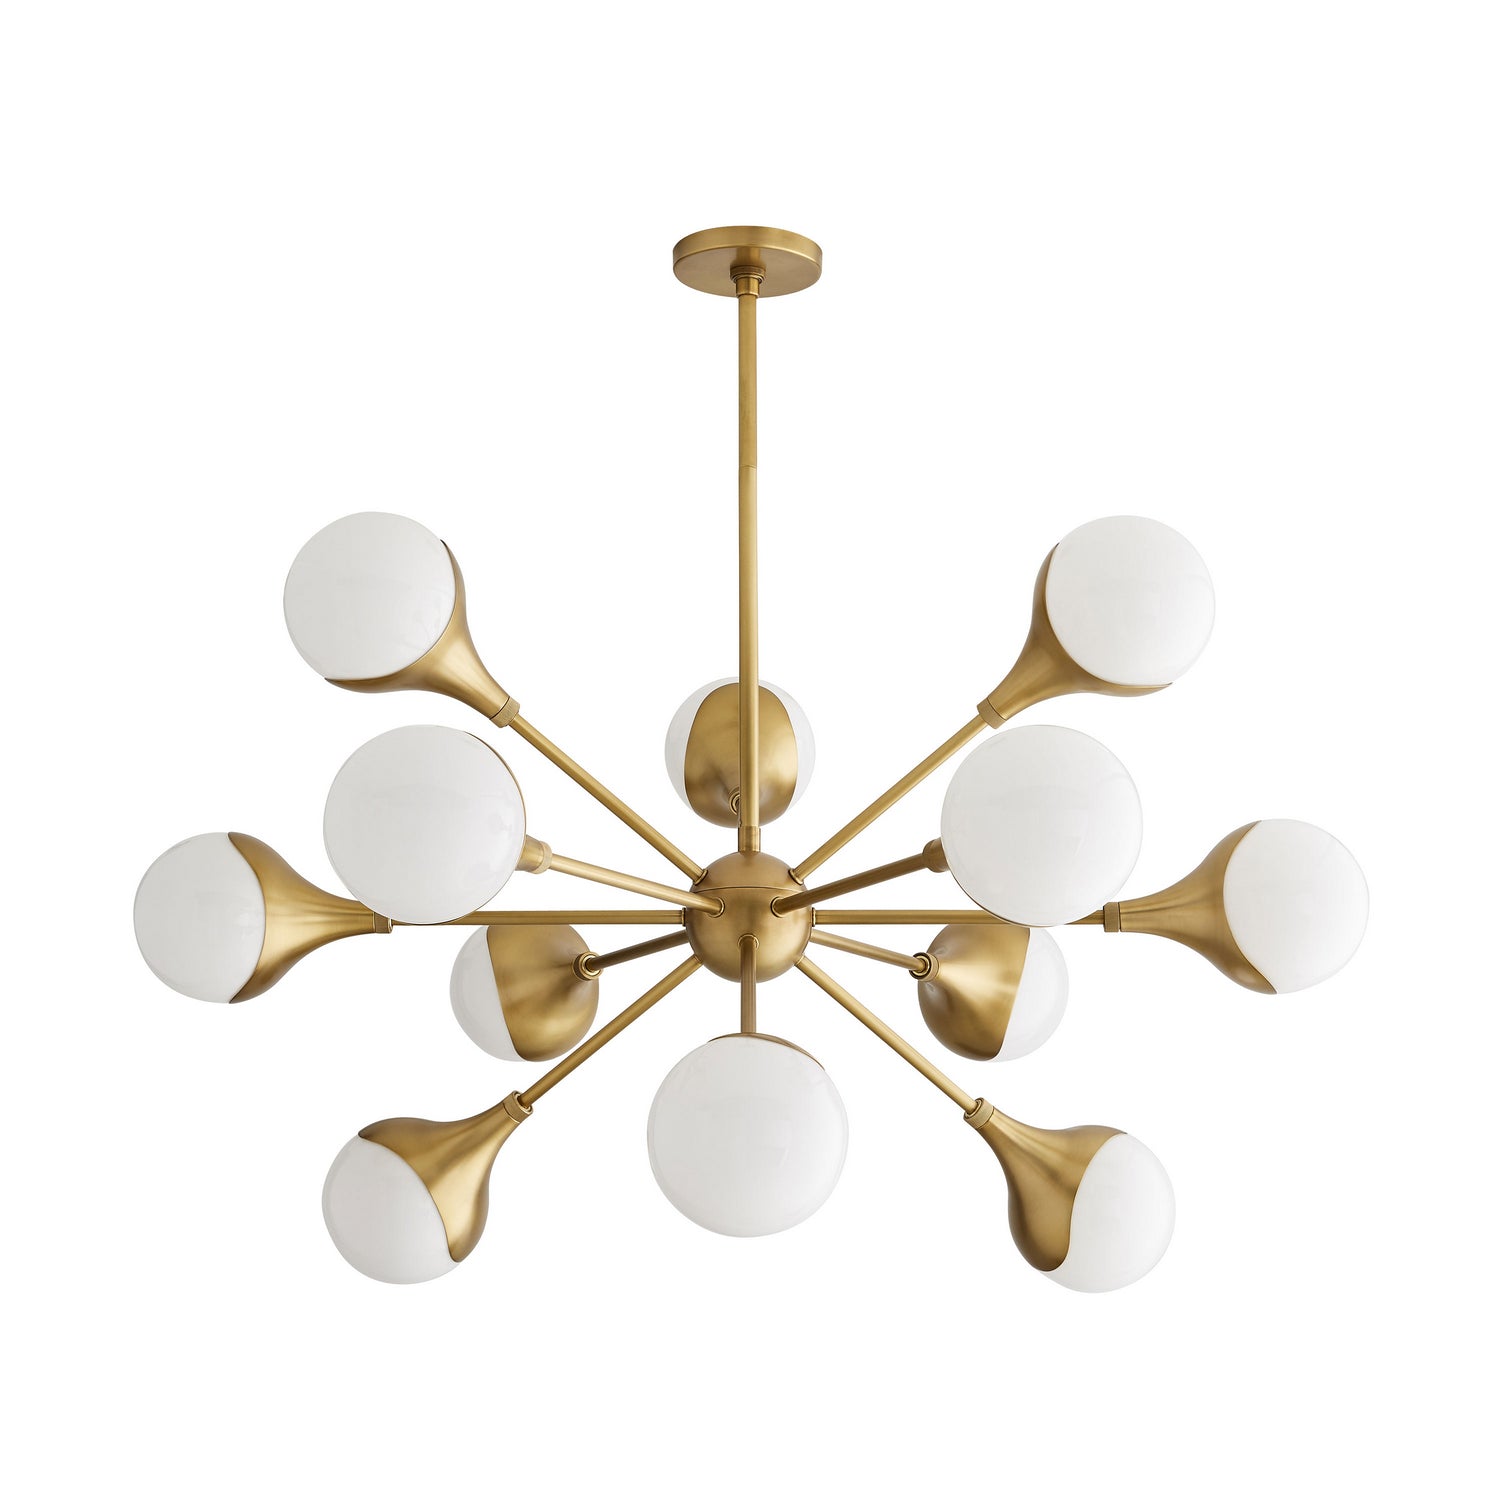 12 Light Chandelier from the Augustus collection in Antique Brass finish